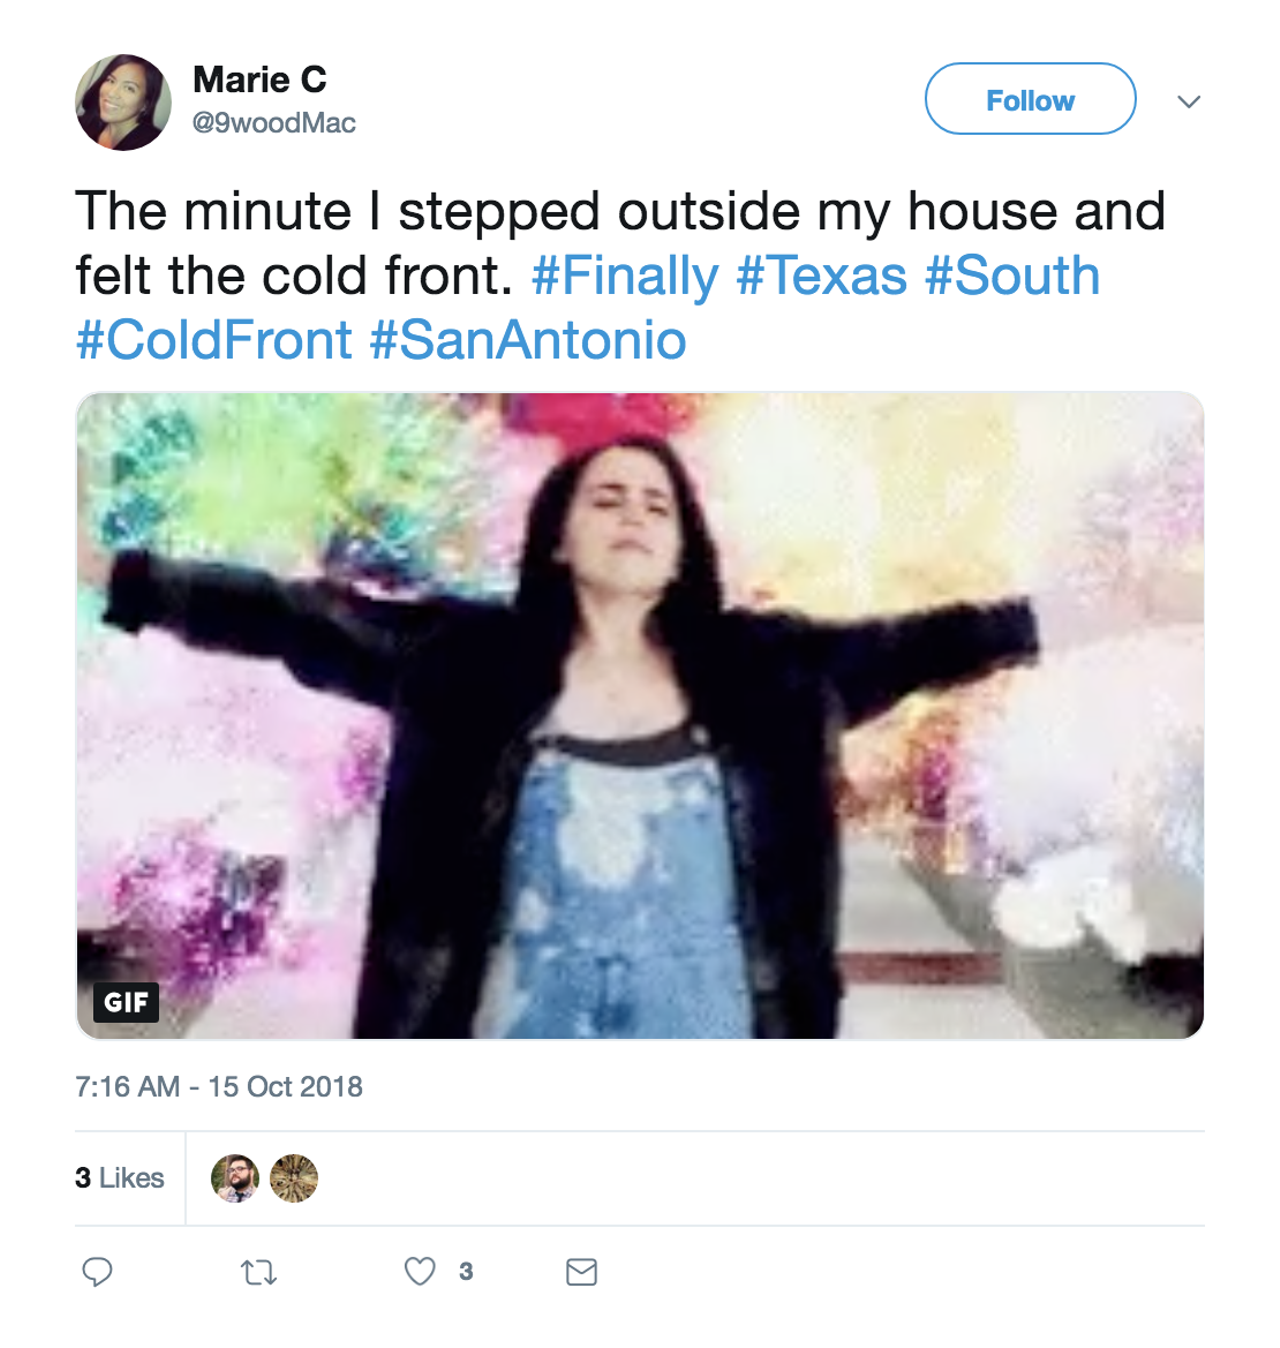 San Antonians Have A Lot of Feelings About The Cold Weather